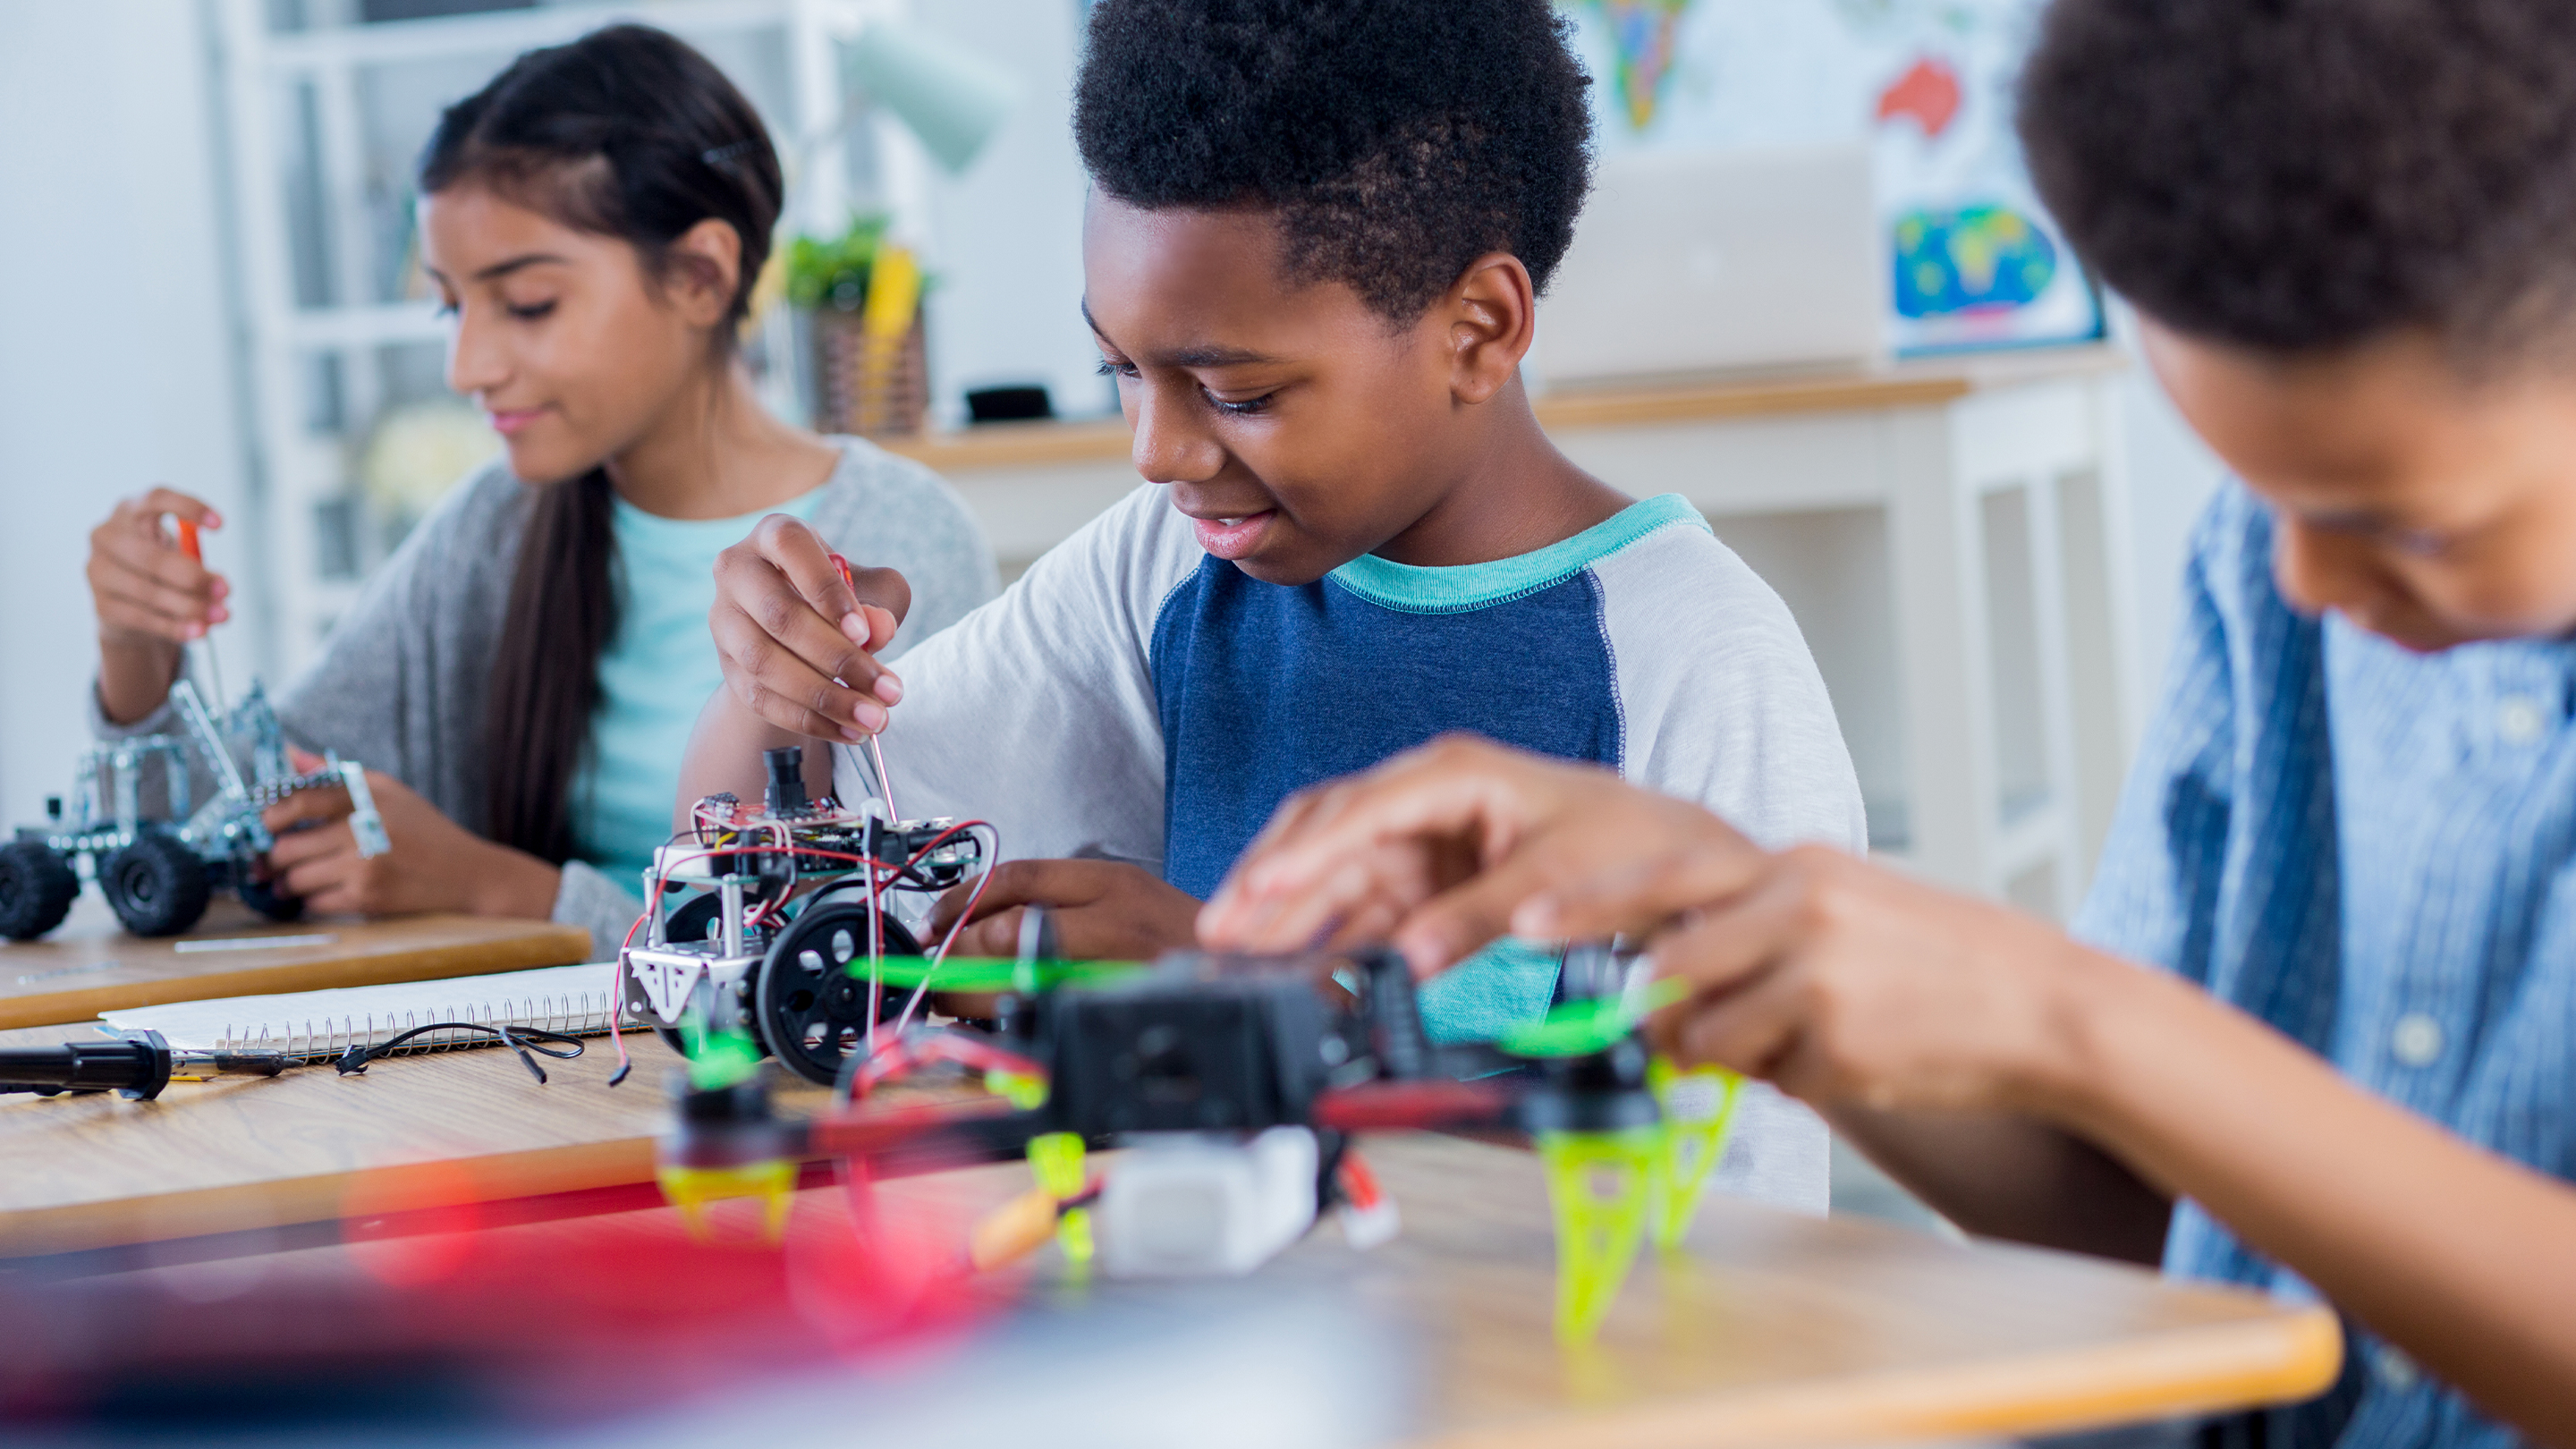 6 tools to help kids learn coding and robotics